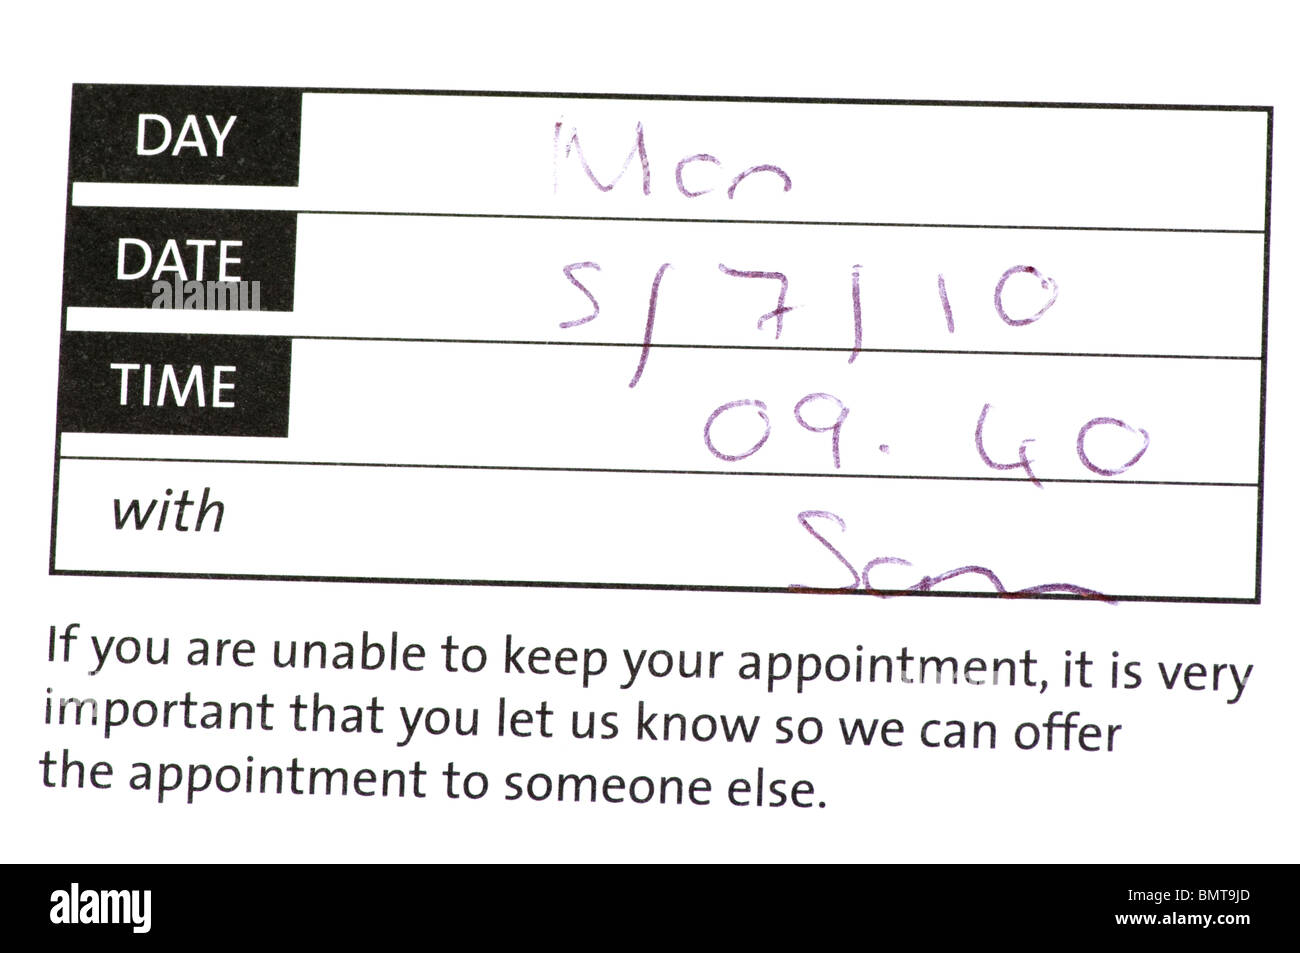 A Doctors Appointment Card Stock Photo